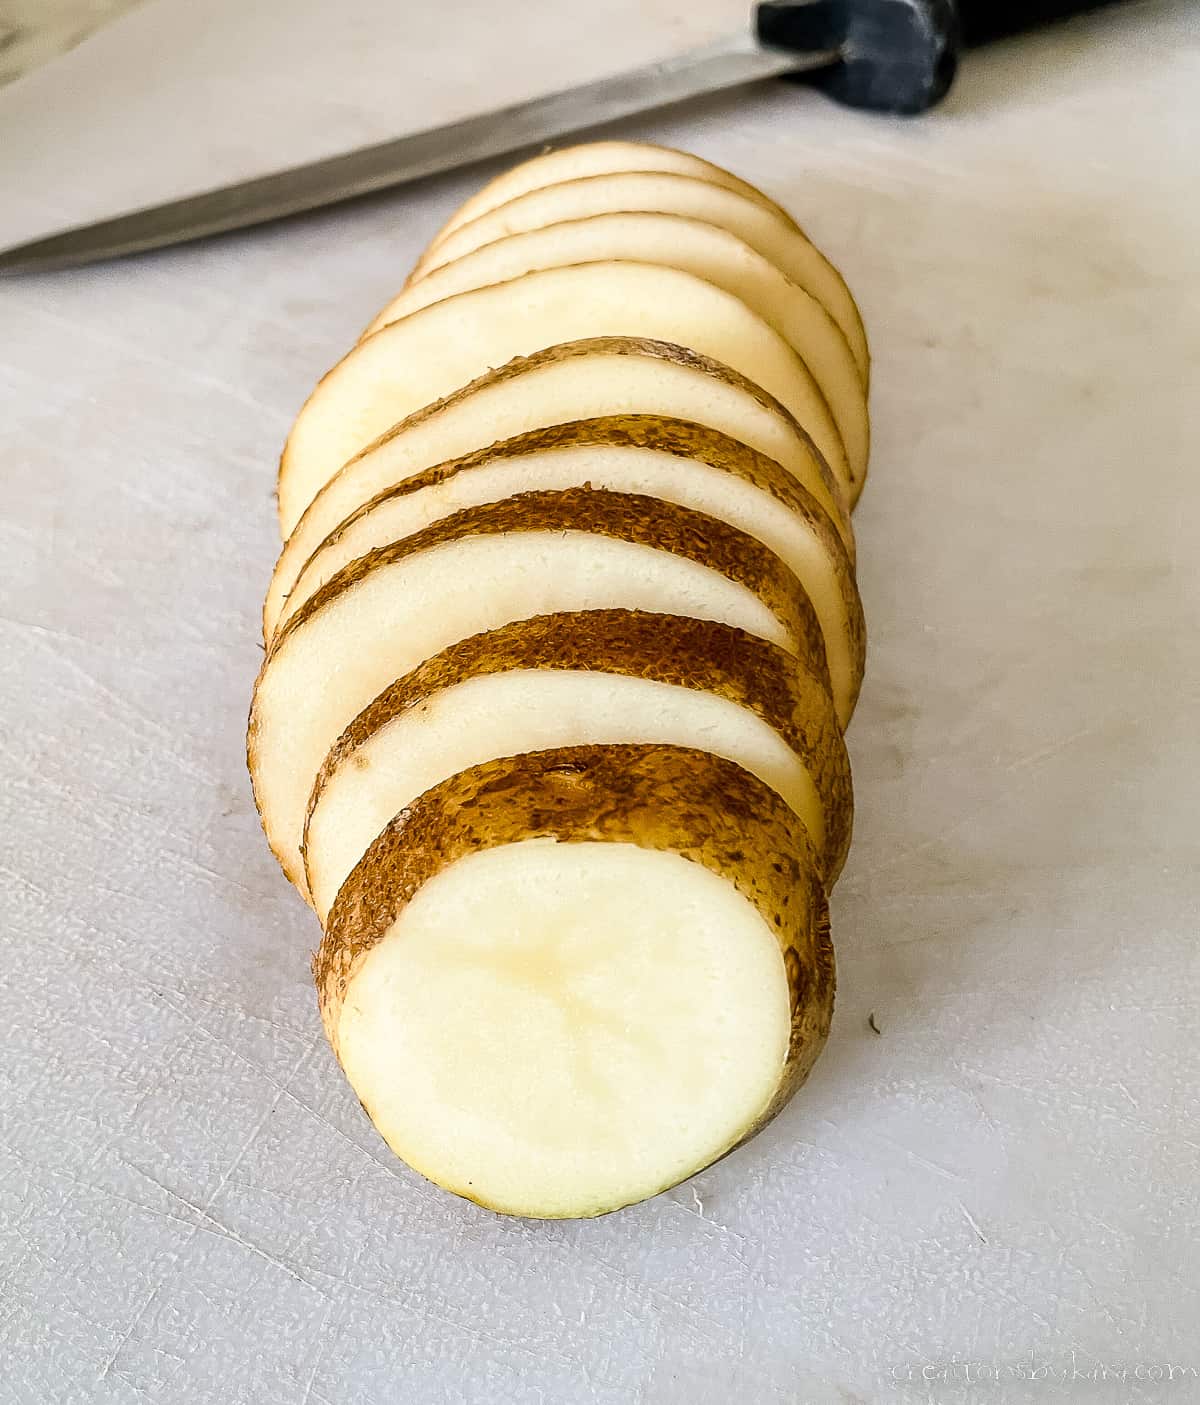 sliced russet potato on a cutting board